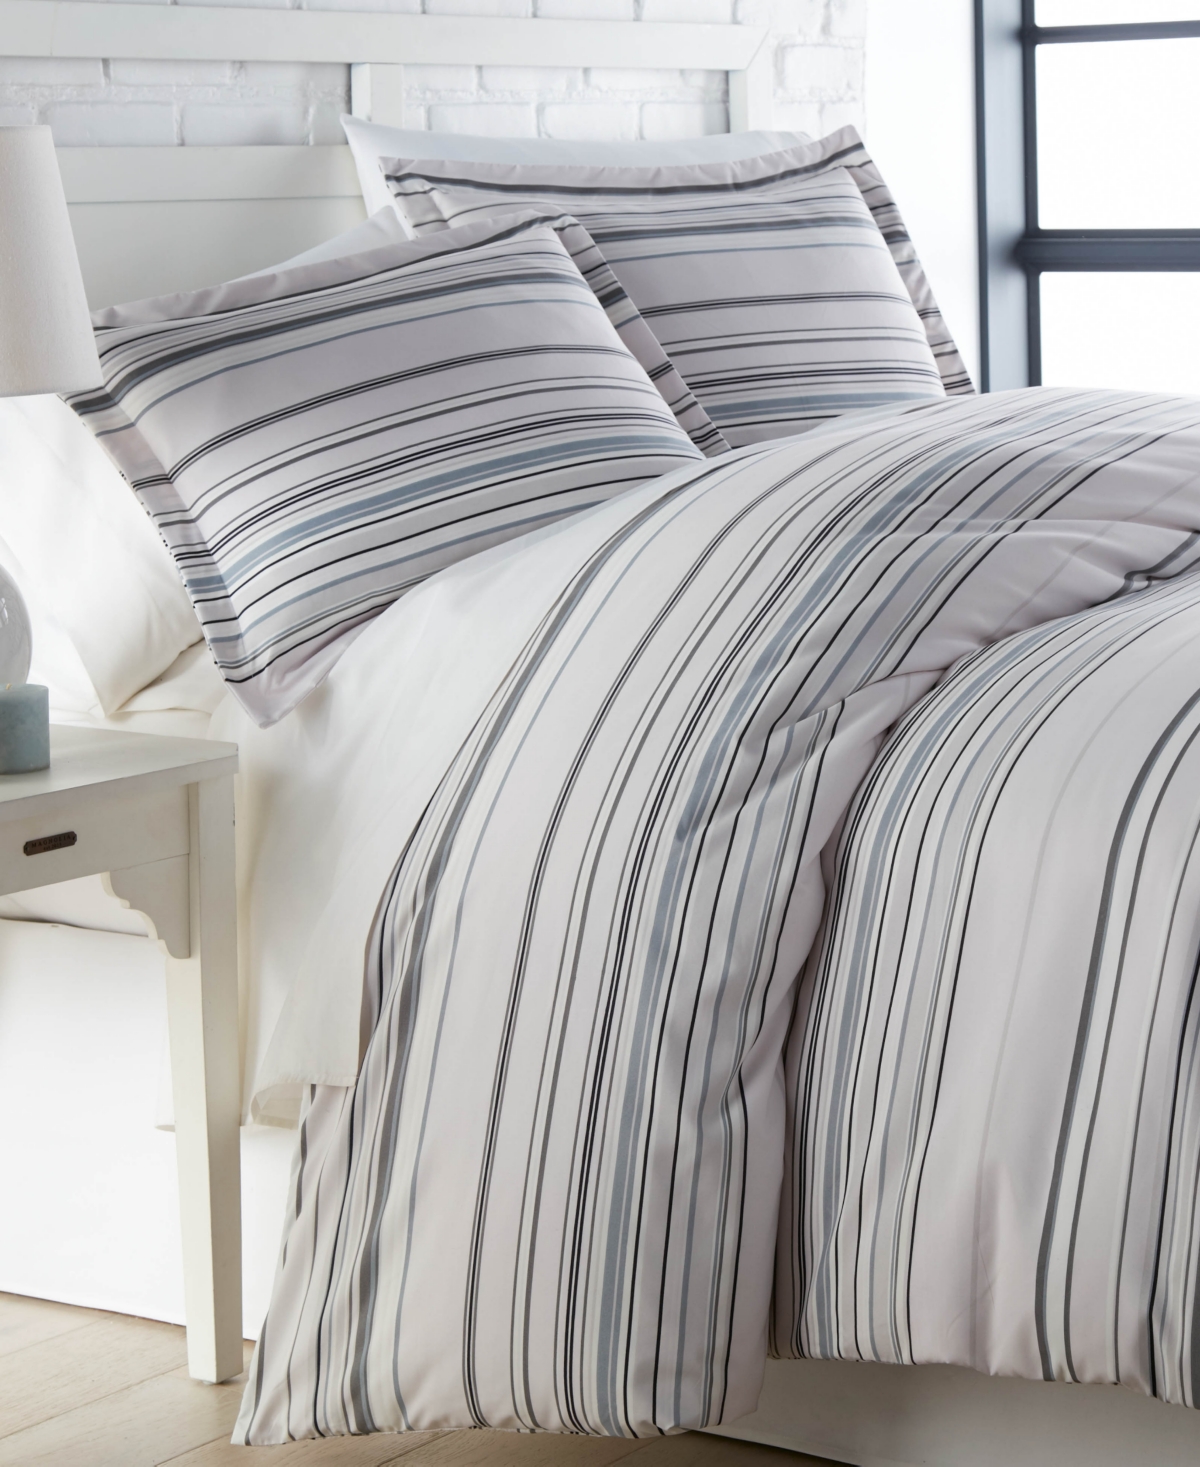 Southshore Fine Linens Stripe 3 Piece Comforter And Sham Set, King In Gray